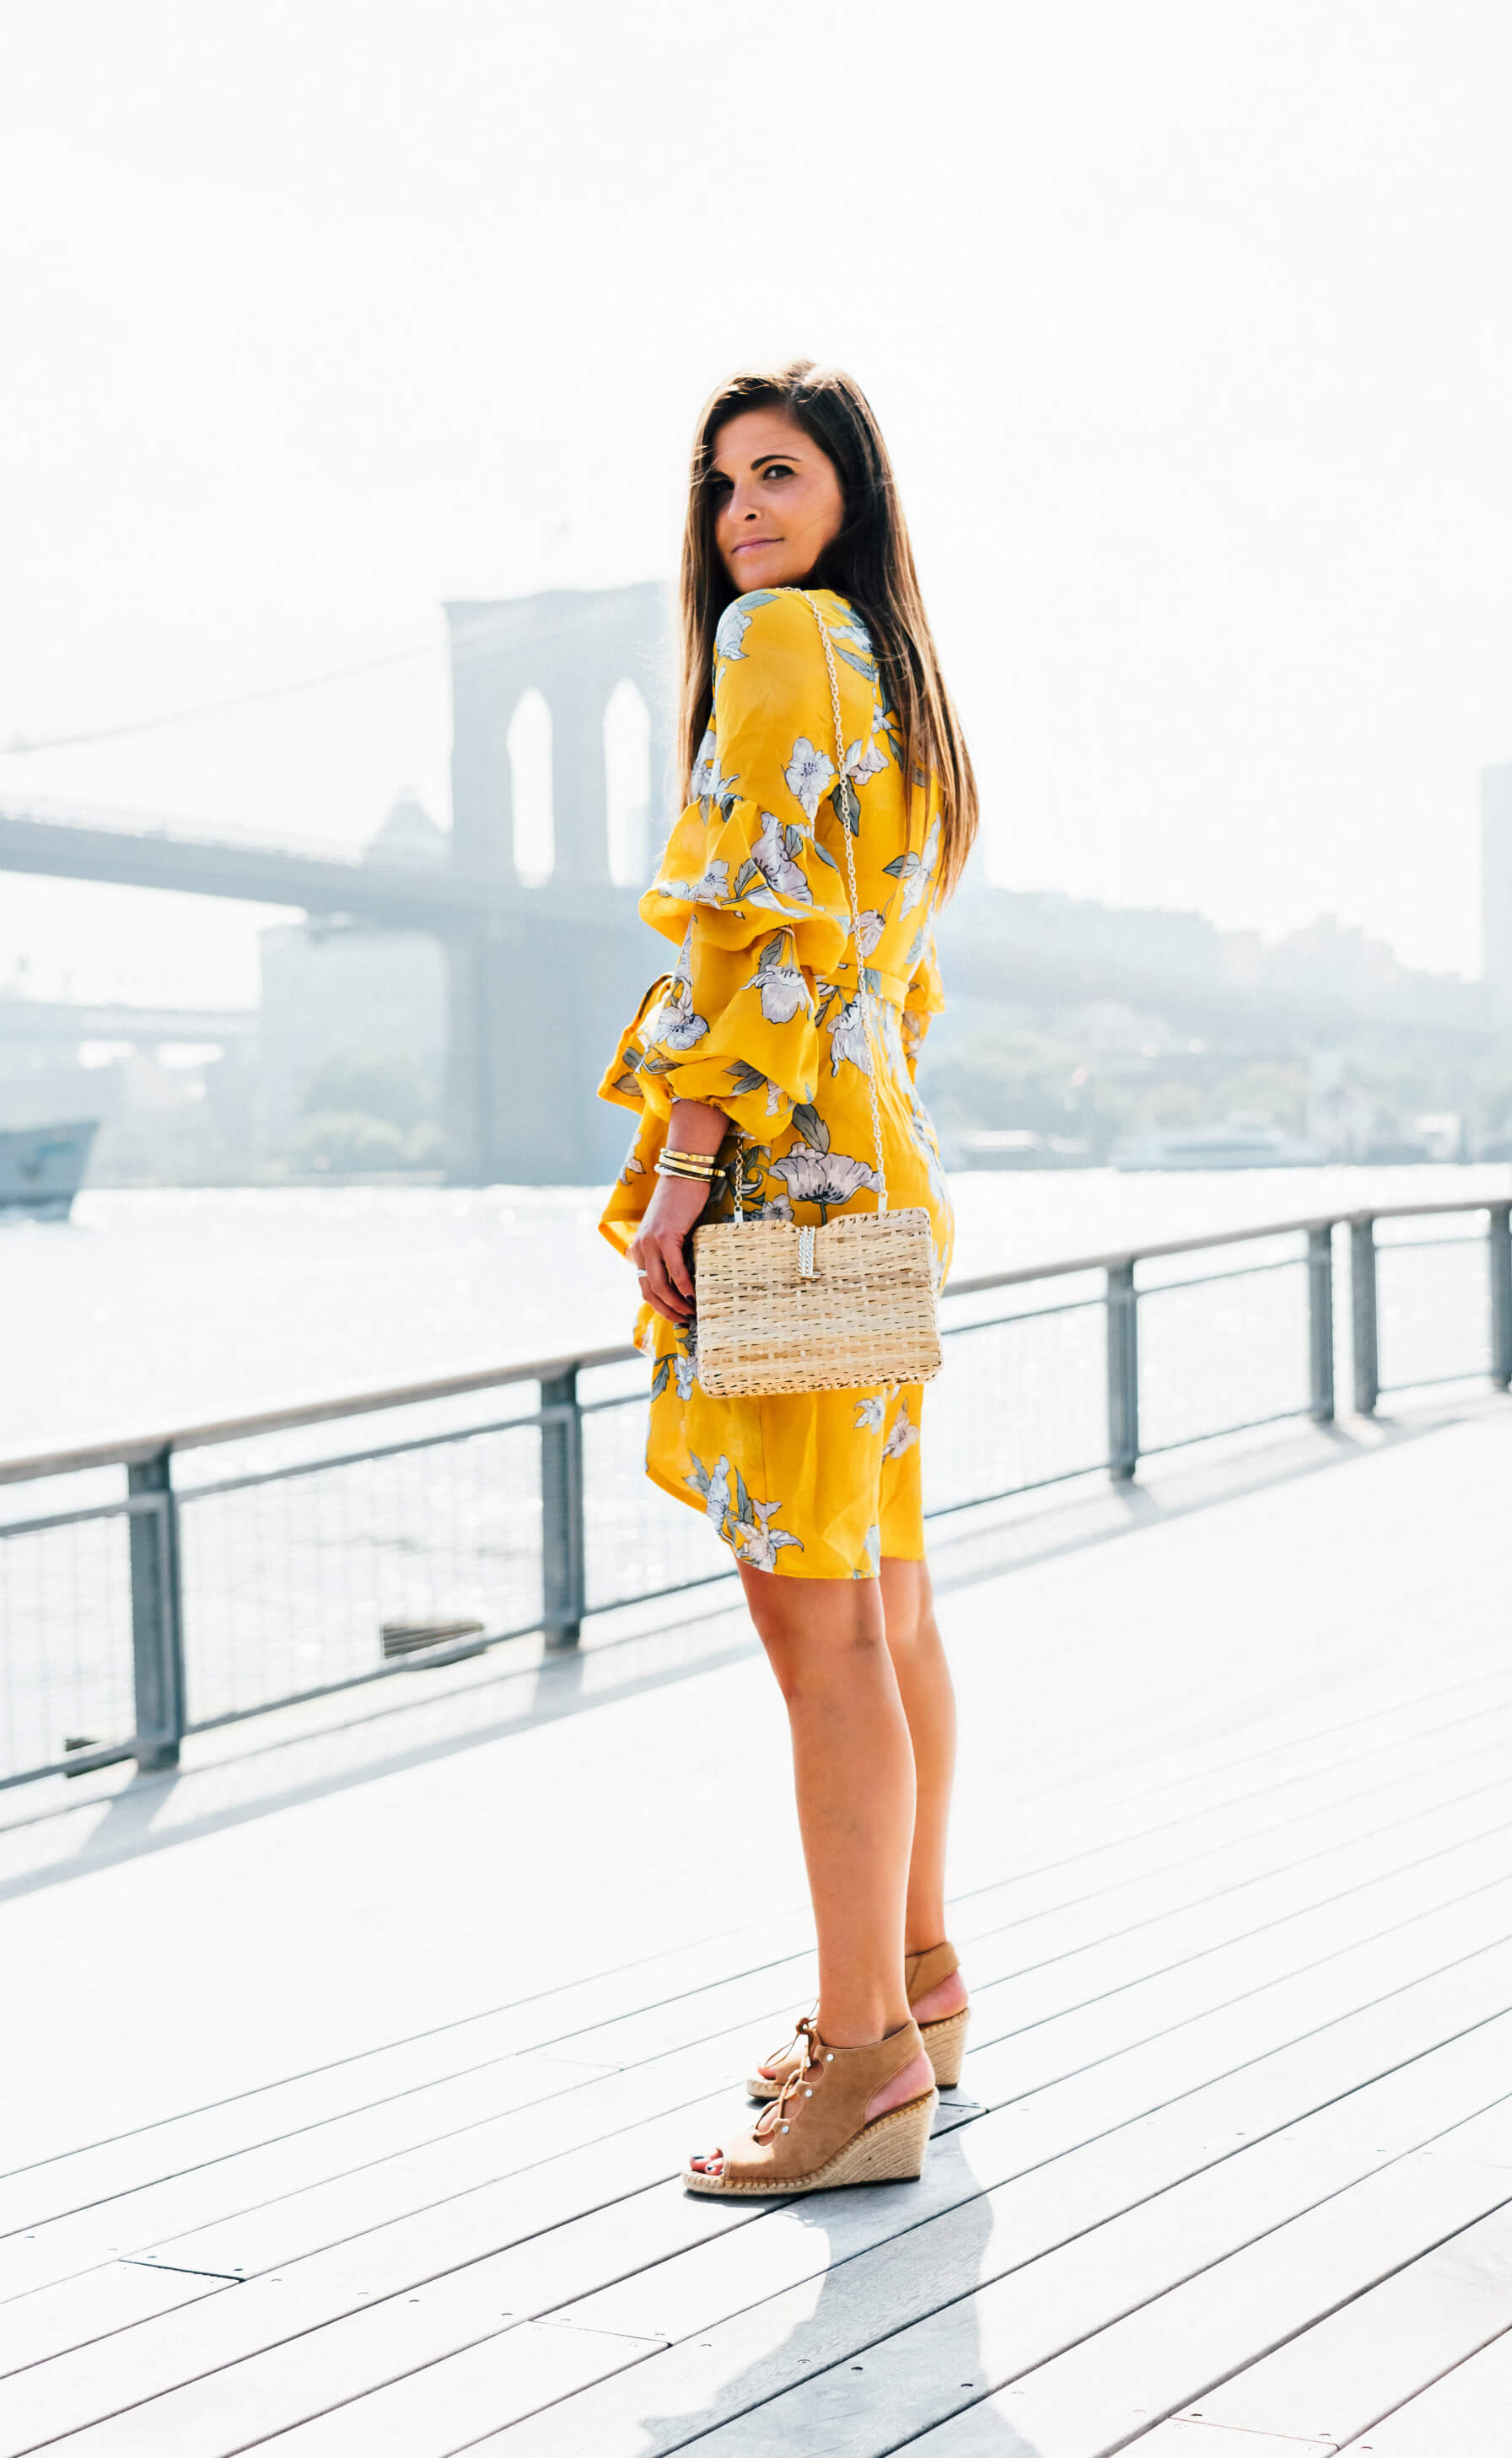 Christelle x J.O.A. Yellow Floral Dress, Summer & Fall Date Outfit, Brooklyn Bridge Photo Shoot, Tilden of To Be Bright